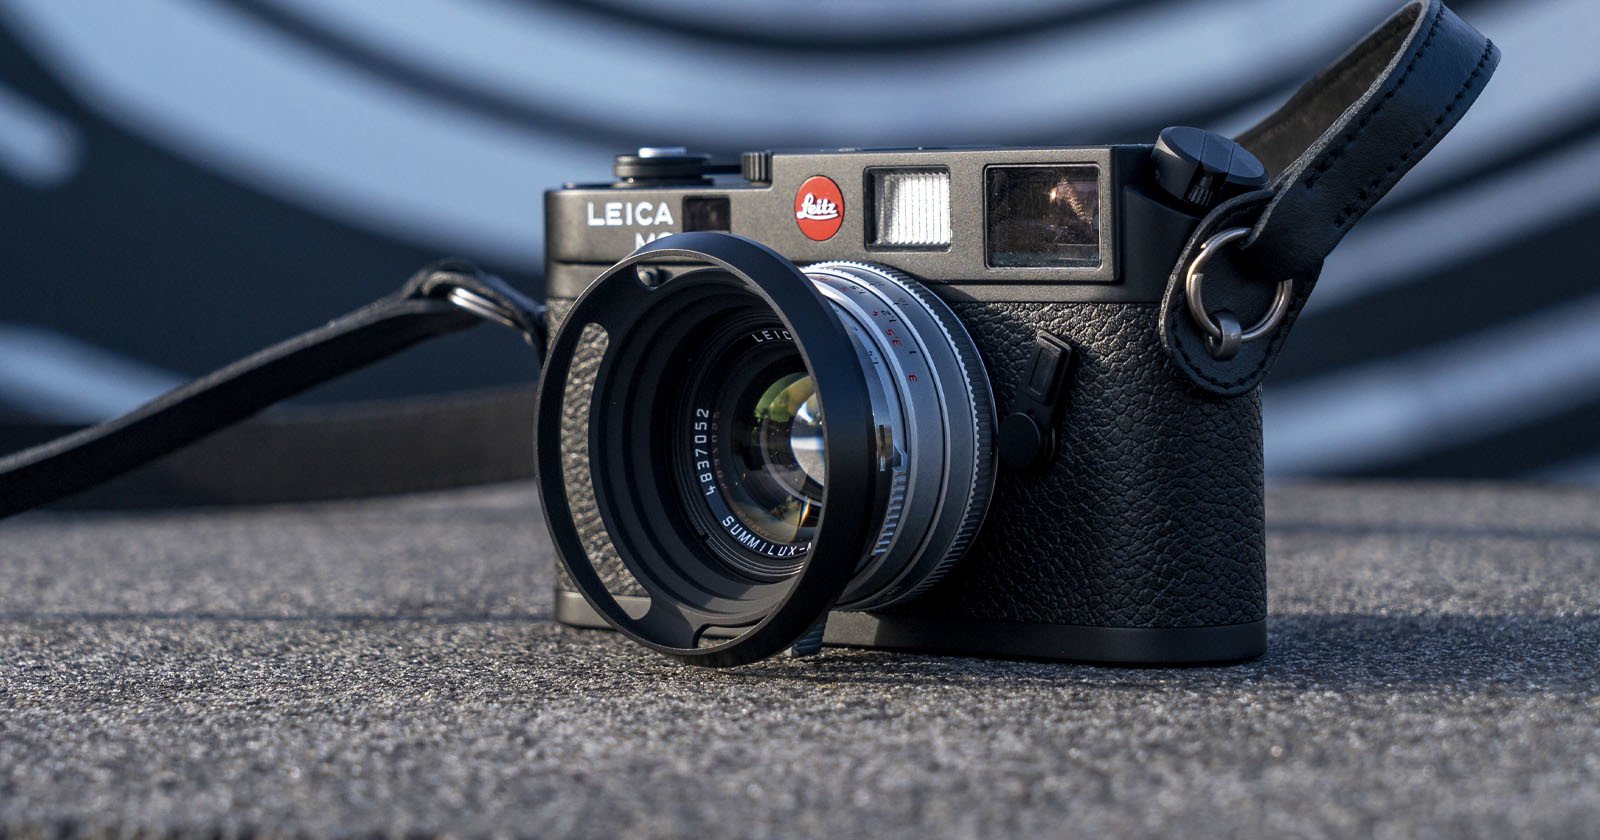  hands-on leica rediscovering film photography 